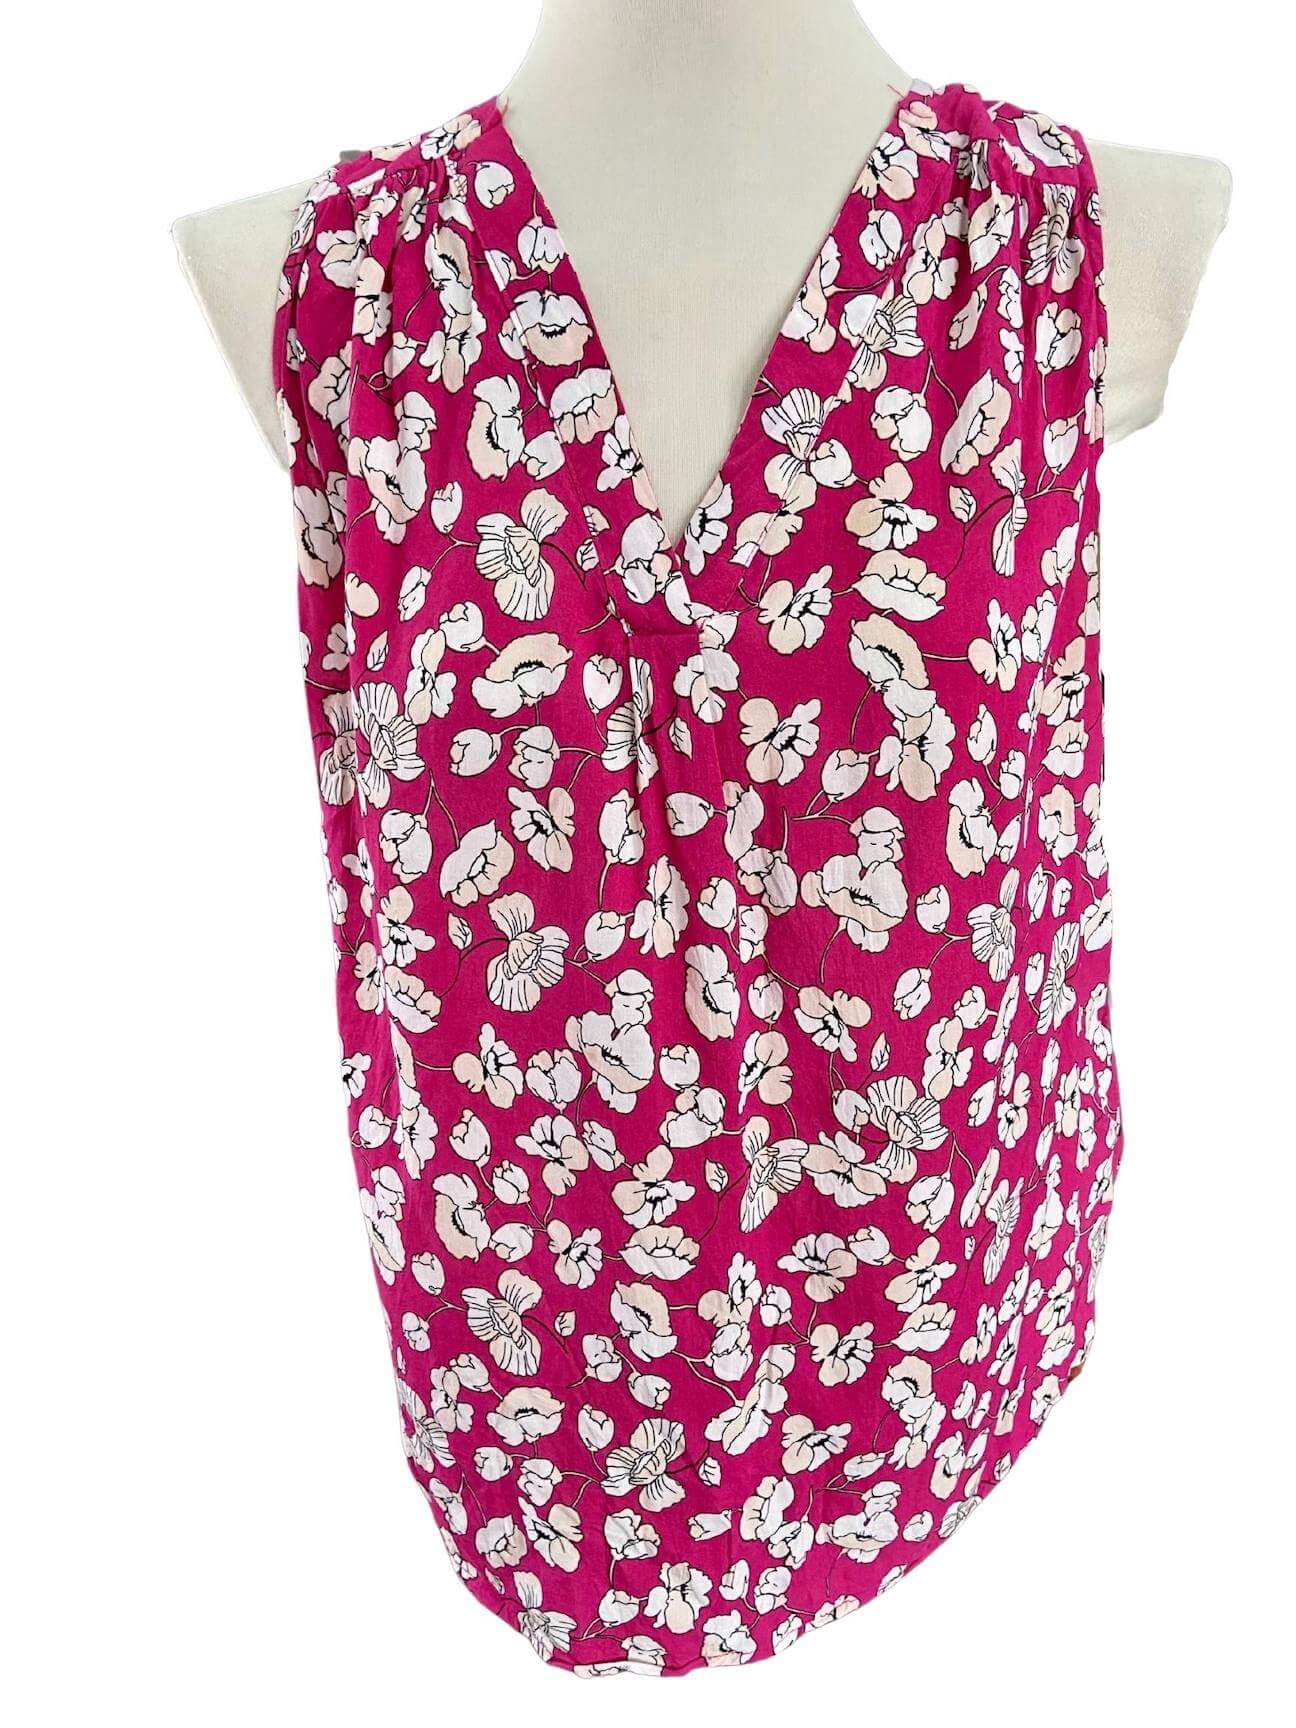 Bright Winter ANTIBES BLANC pink floral top